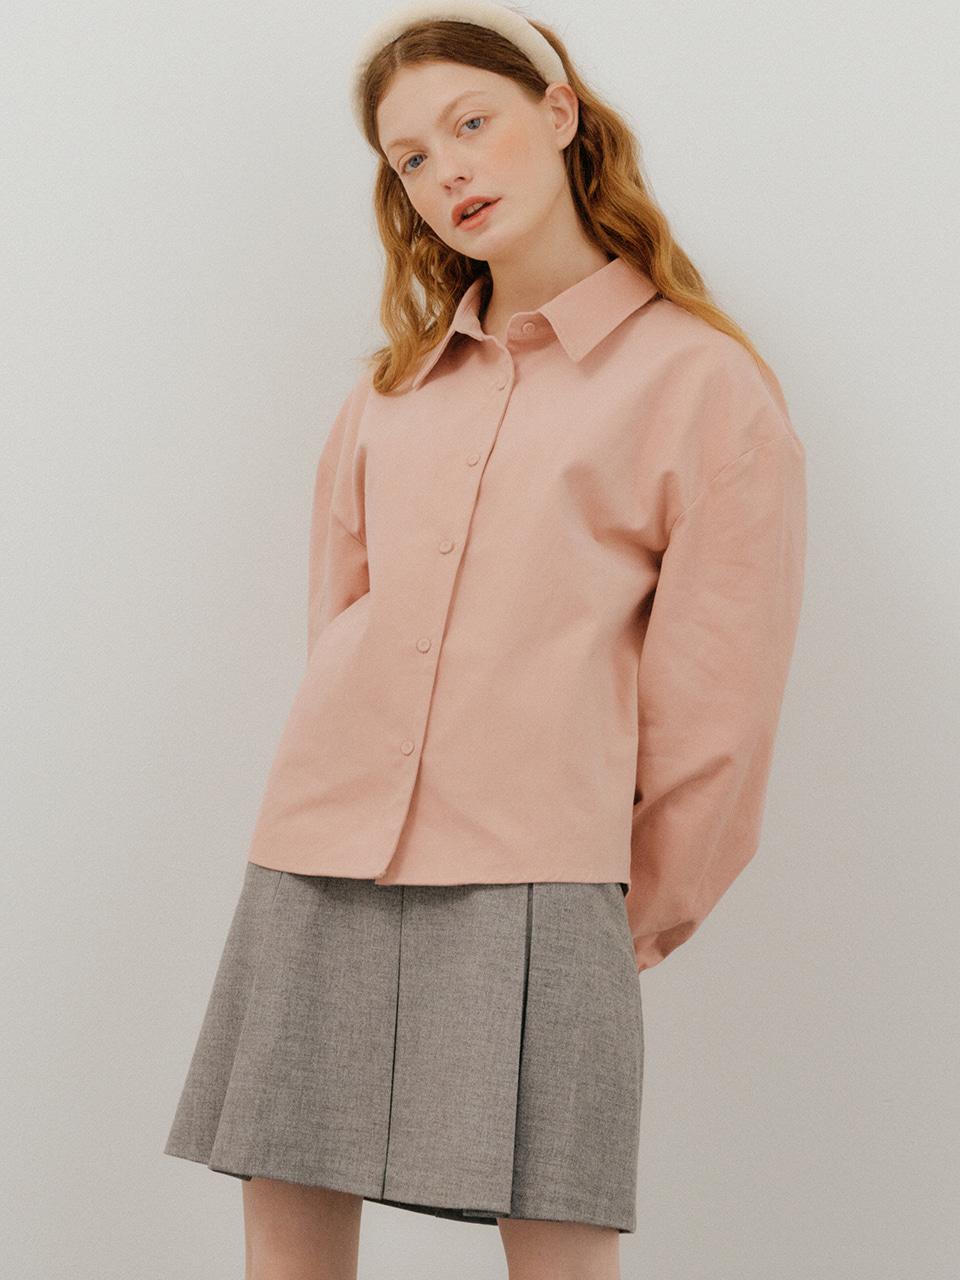 monts 1553 long sleeve string shirt (pink)